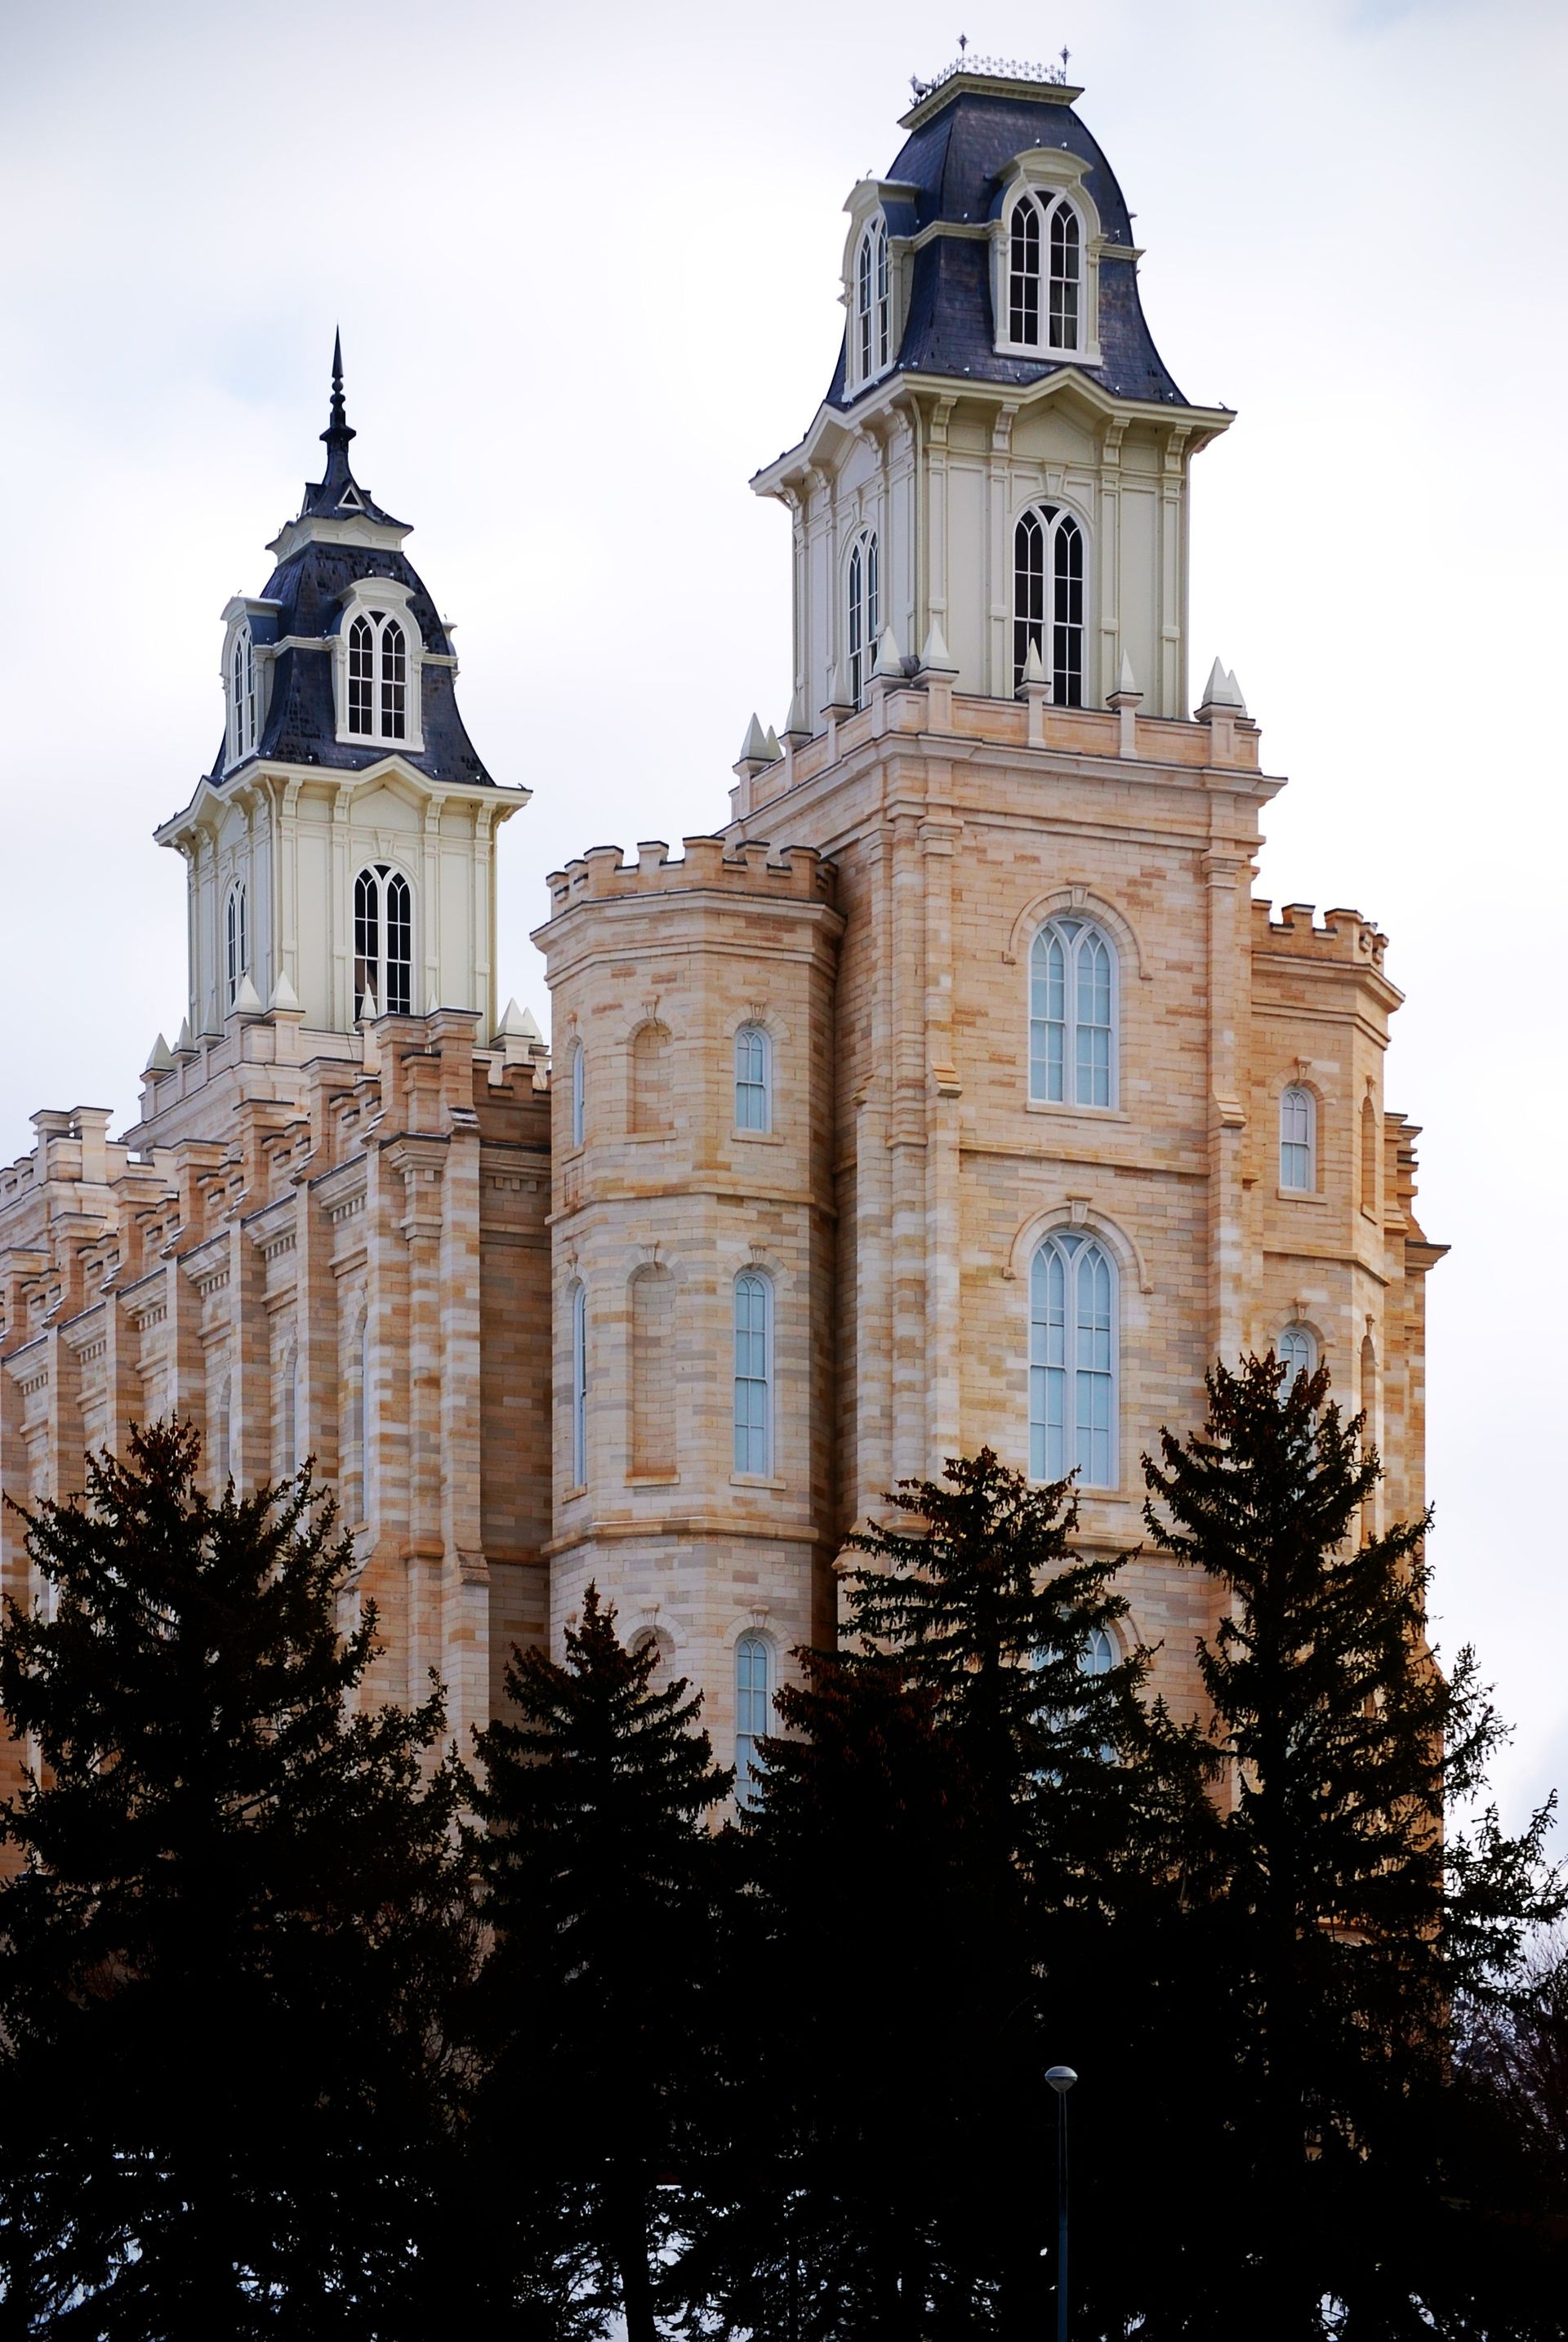 The Manti Utah Temple spires in the winter, including scenery.